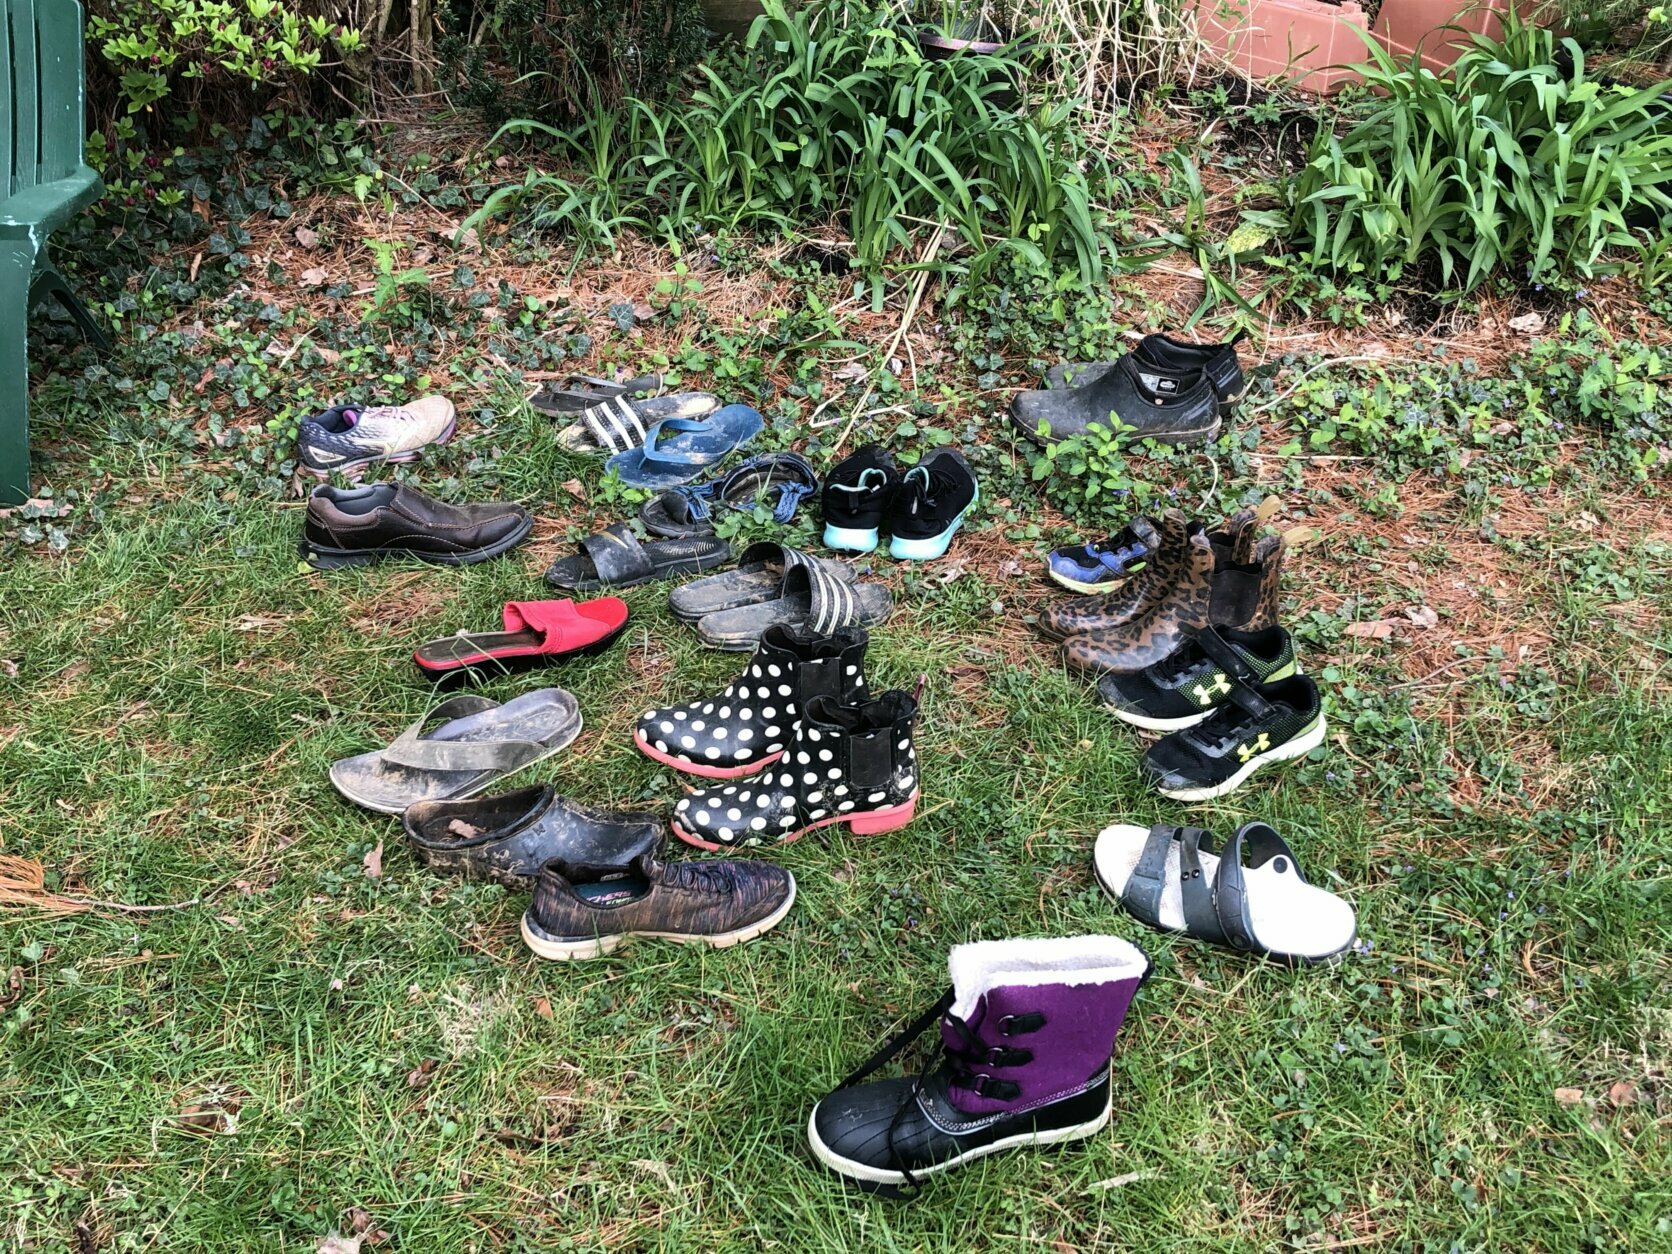 Pastors' yard littered with footwear as fox family steals neighborhood shoes  - WTOP News